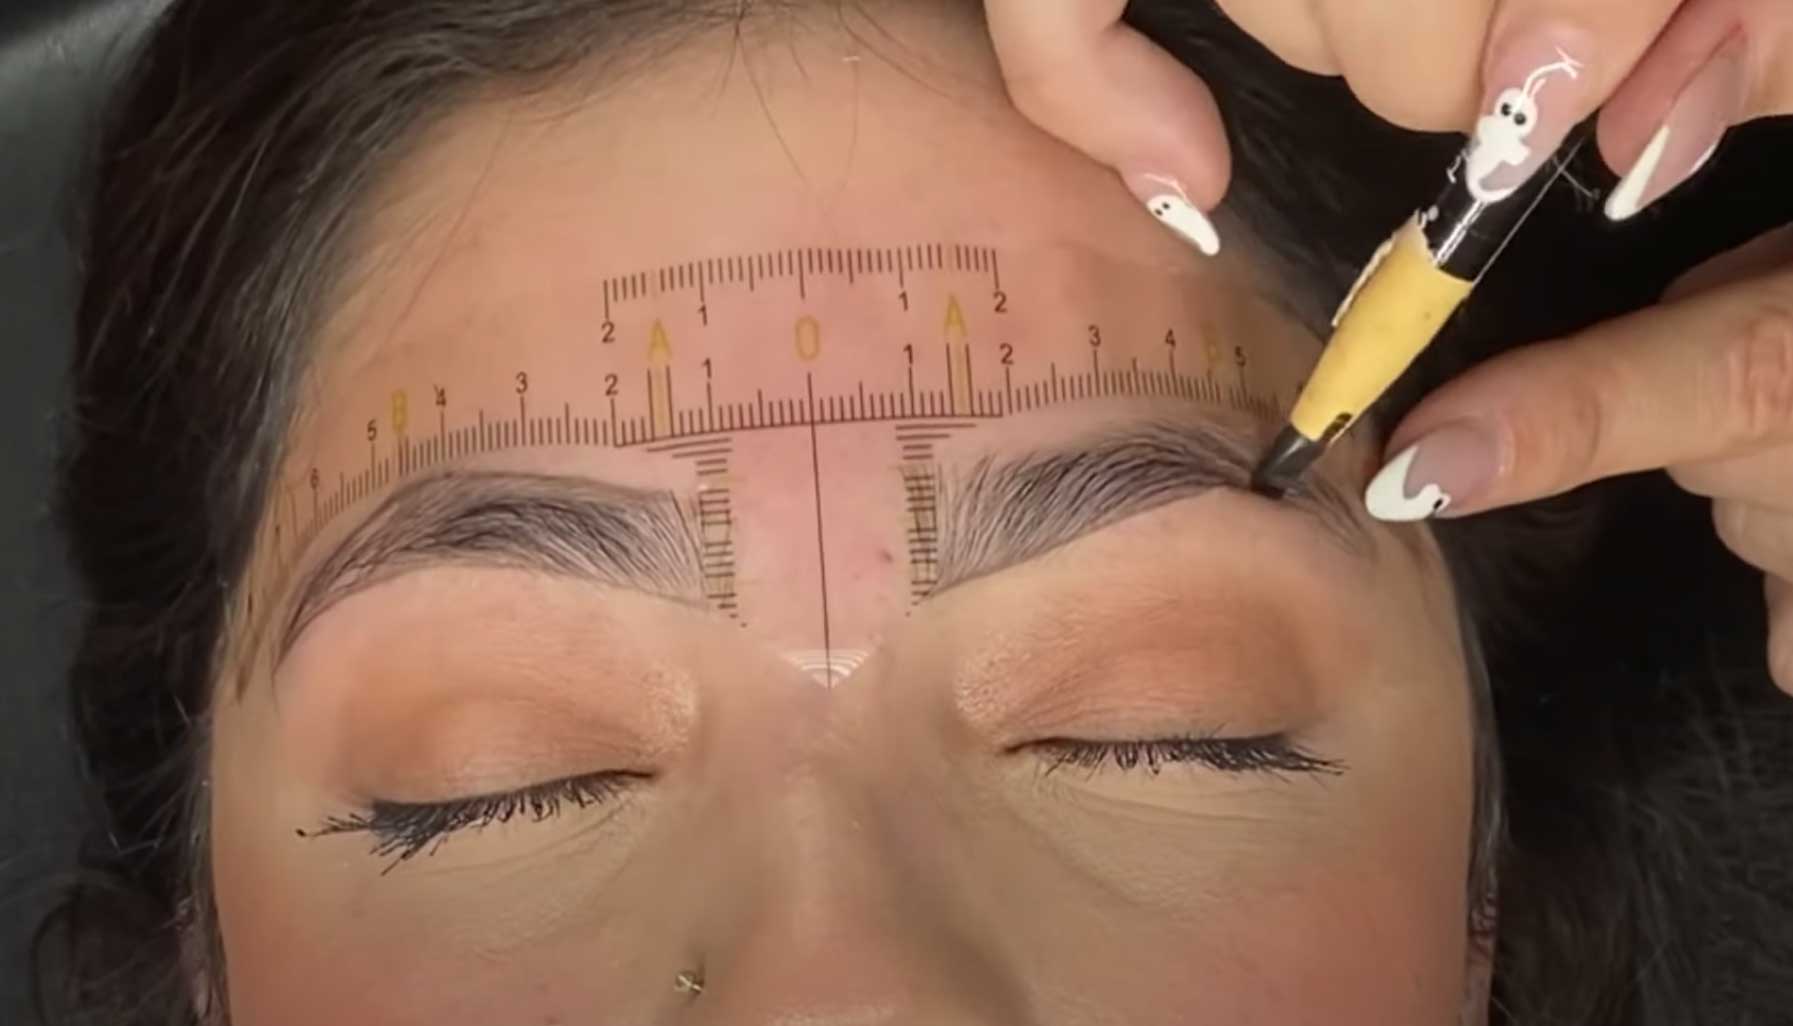 Load video: How to Map out brows 3 different ways